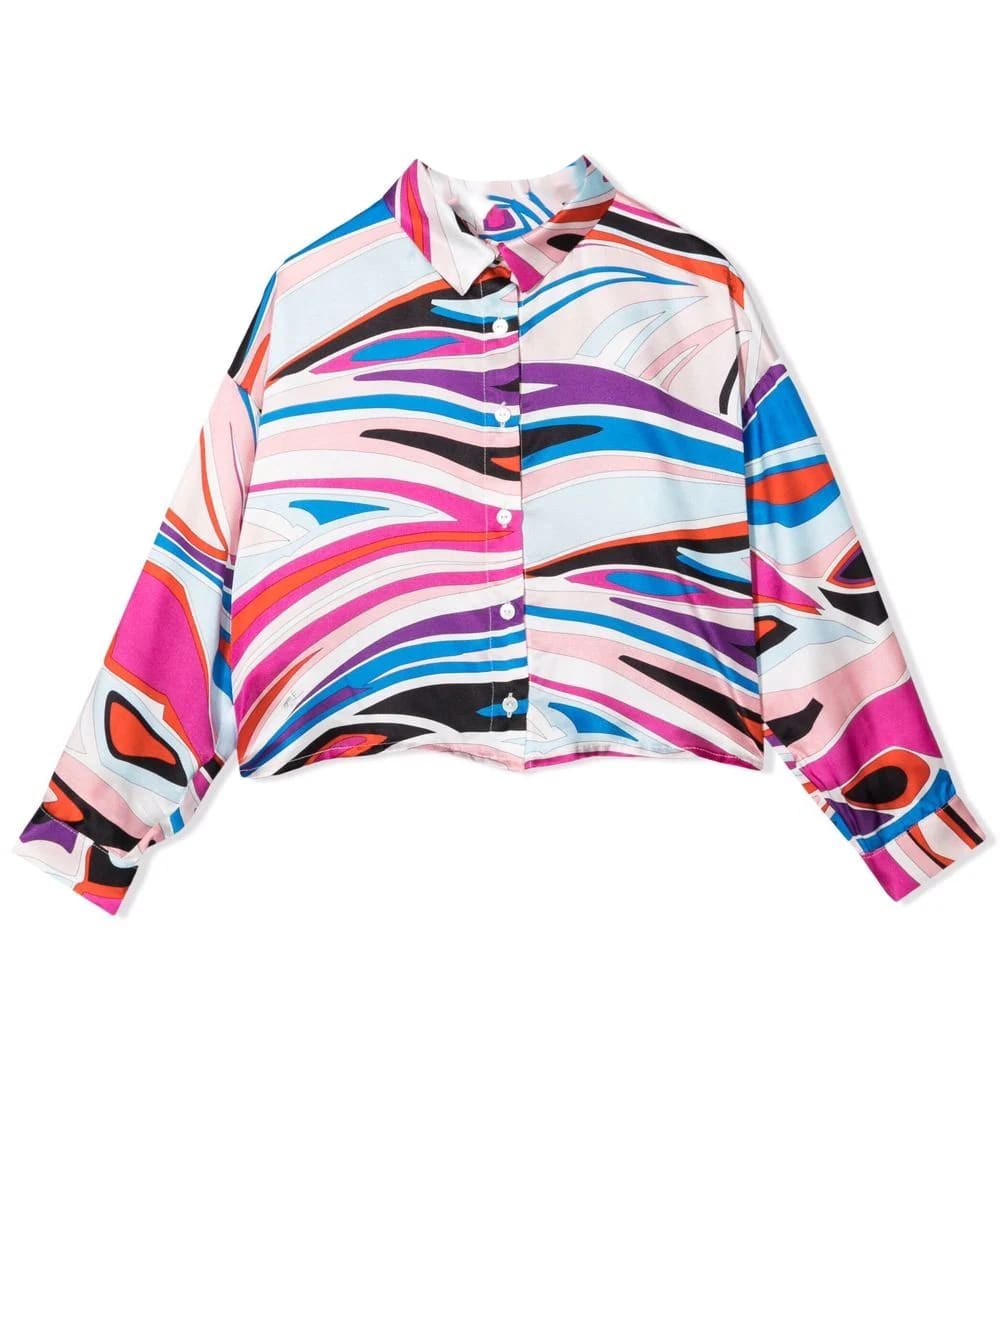 Emilio Pucci Patterned Girl Shirt